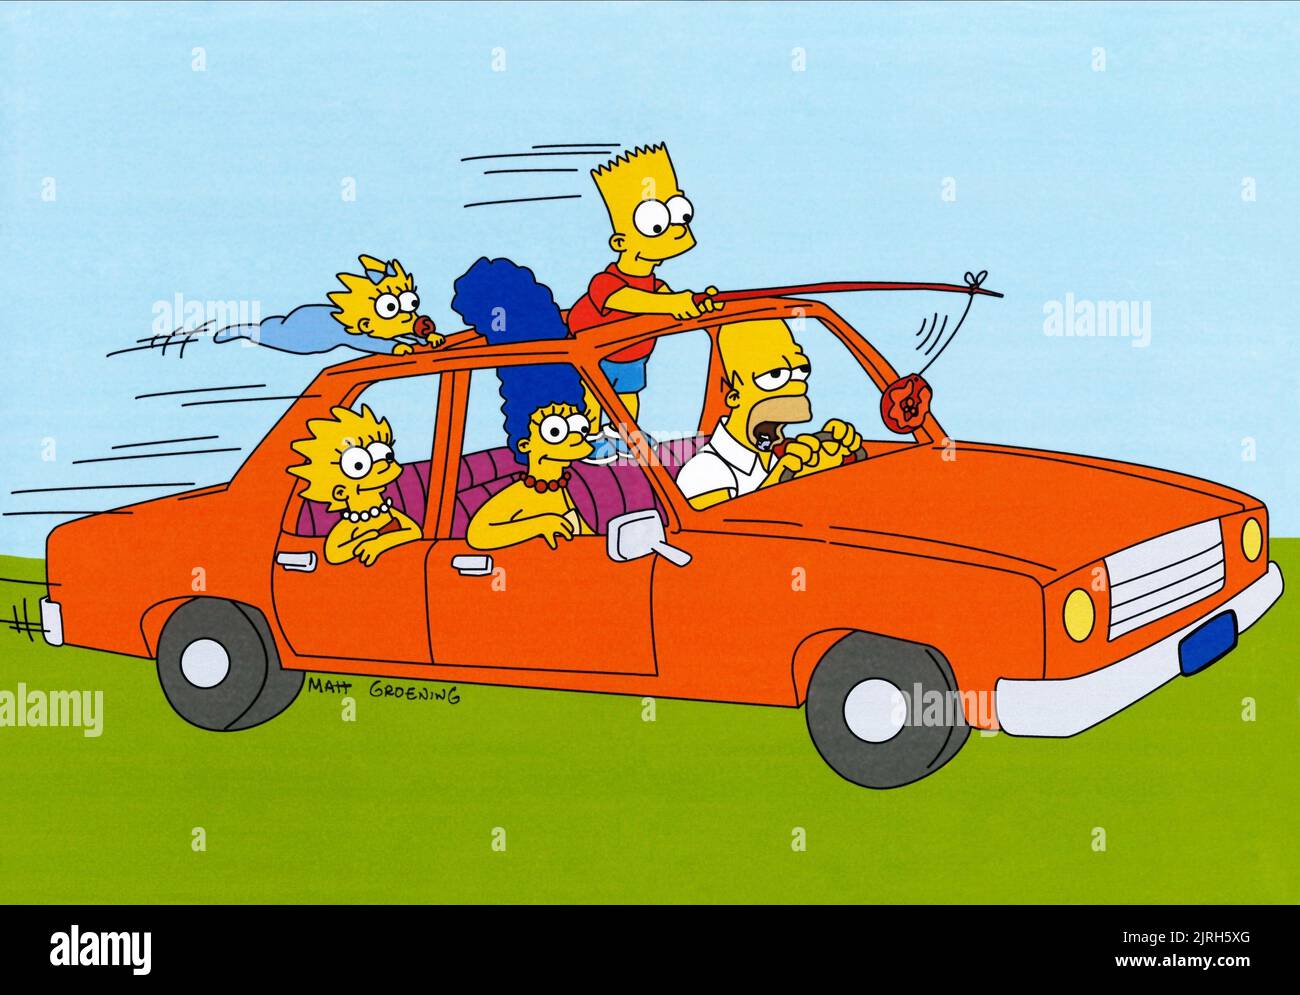 MAGGIE, LISA, MARGE, BART, HOMER SIMPSON, THE SIMPSONS, 1989 Stock Photo